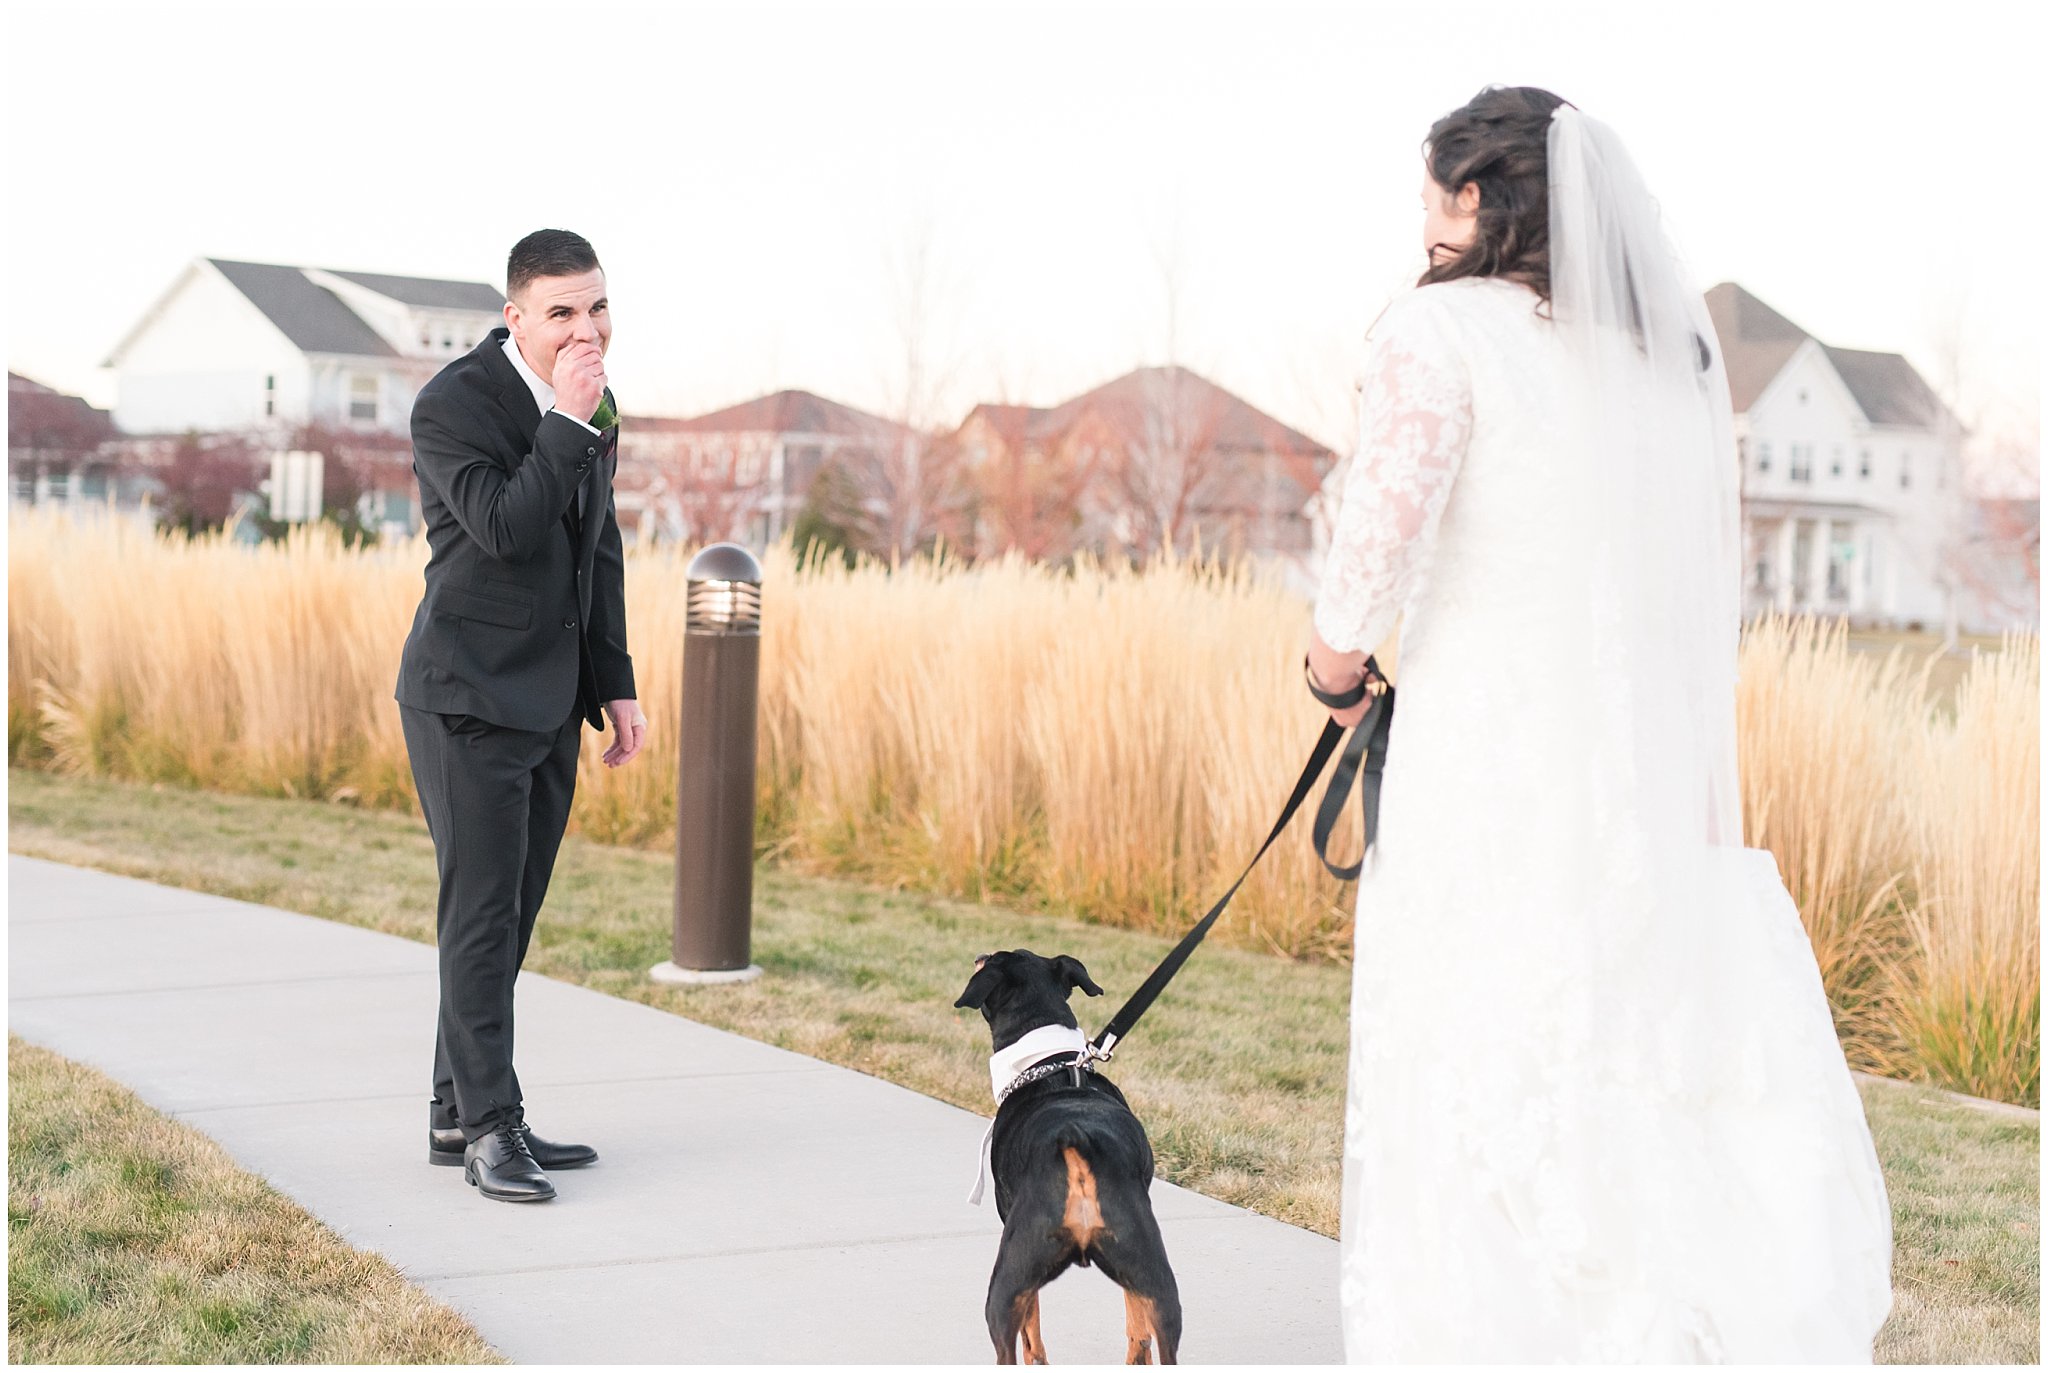 Bride surprises groom with dog on wedding day | Dog first look | Top Utah Wedding and Couples Photos 2019 | Jessie and Dallin Photography